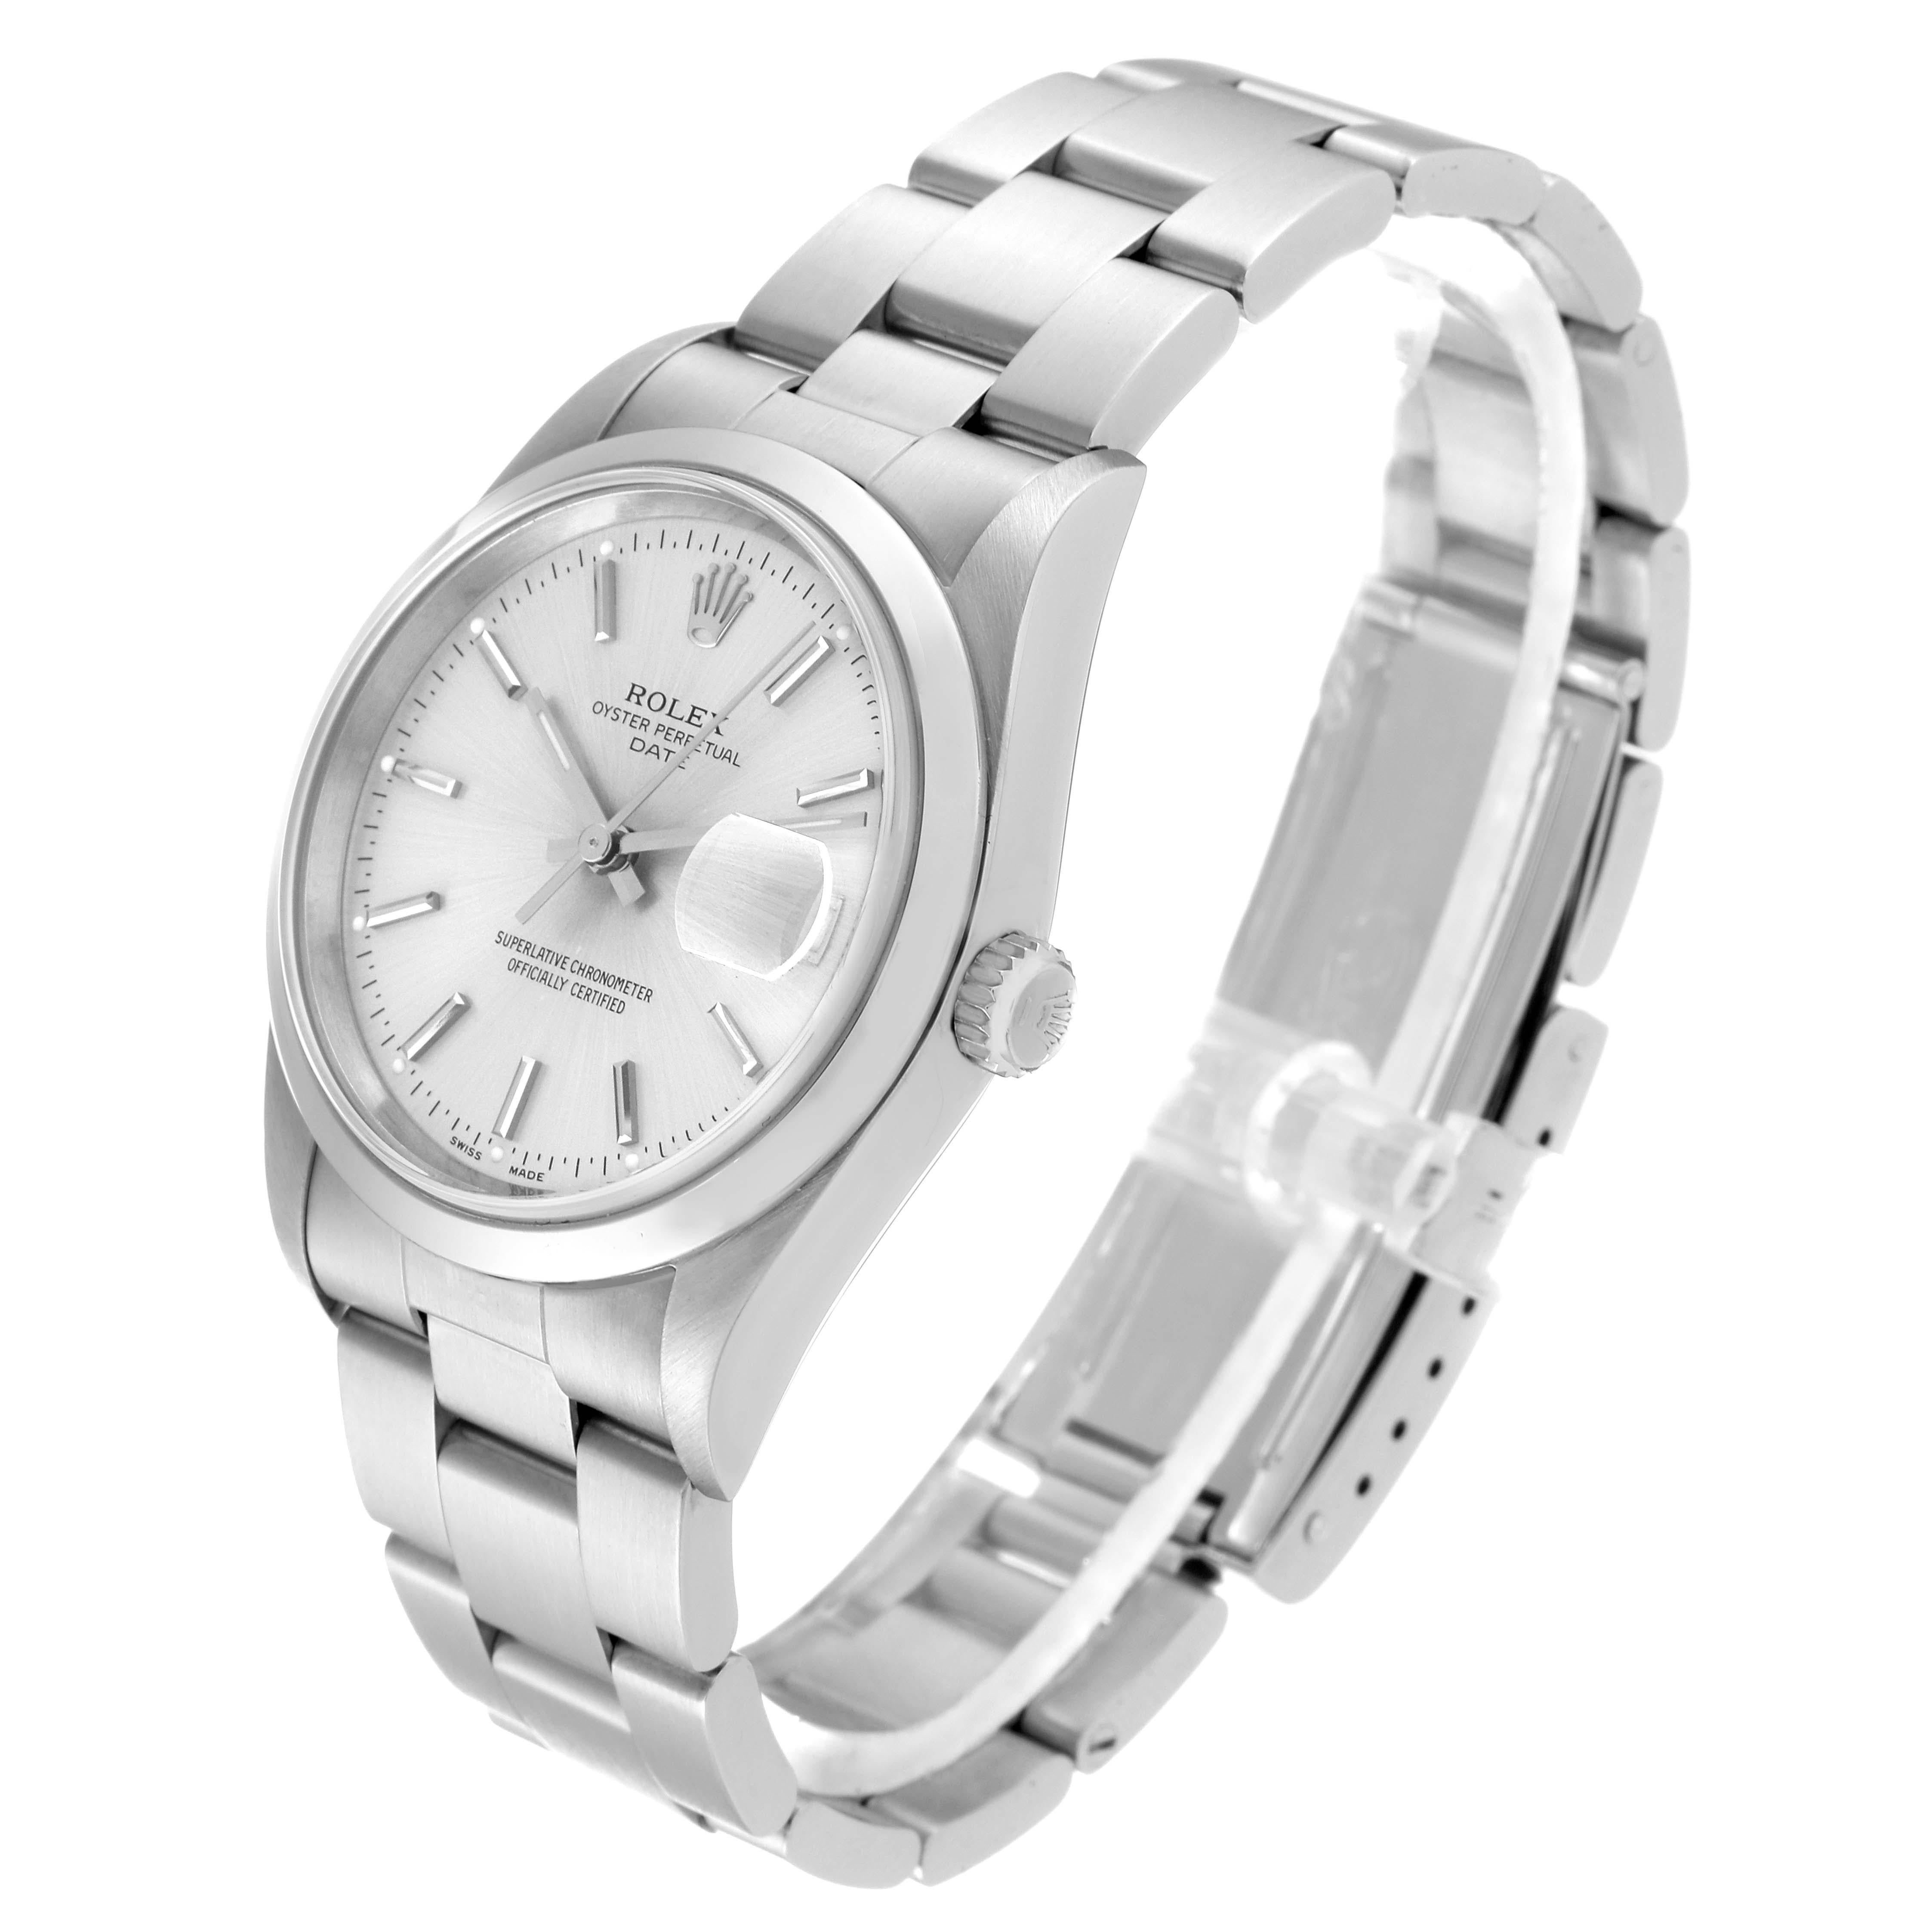 Rolex Date Silver Dial Smooth Bezel Steel Mens Watch 15200 For Sale 4